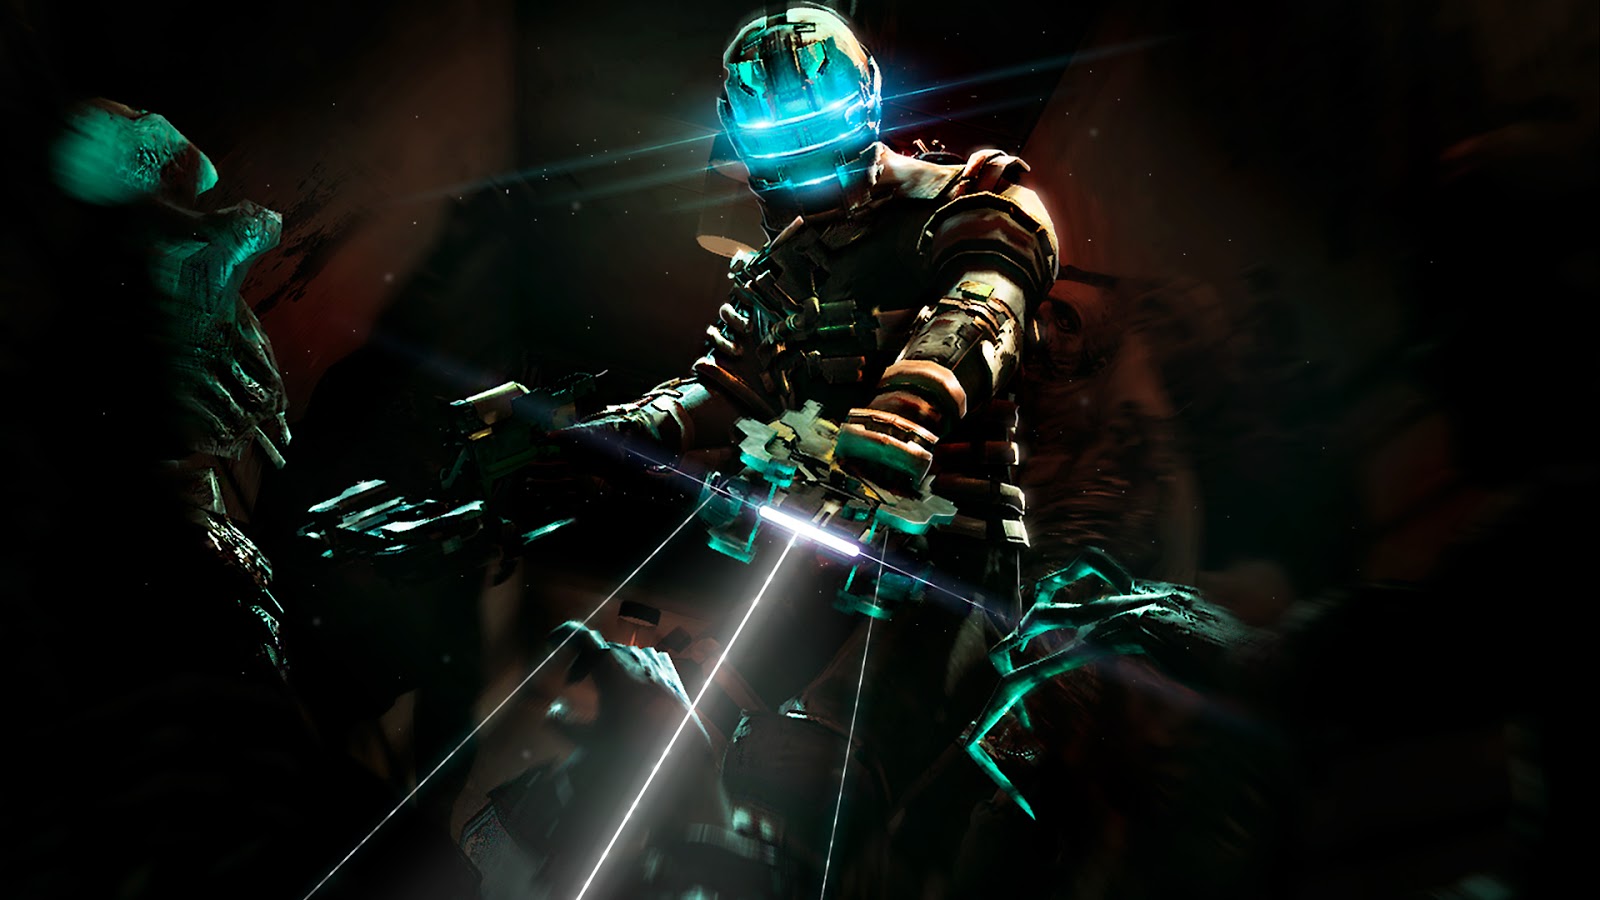 download dead space hd android game full apk sd free